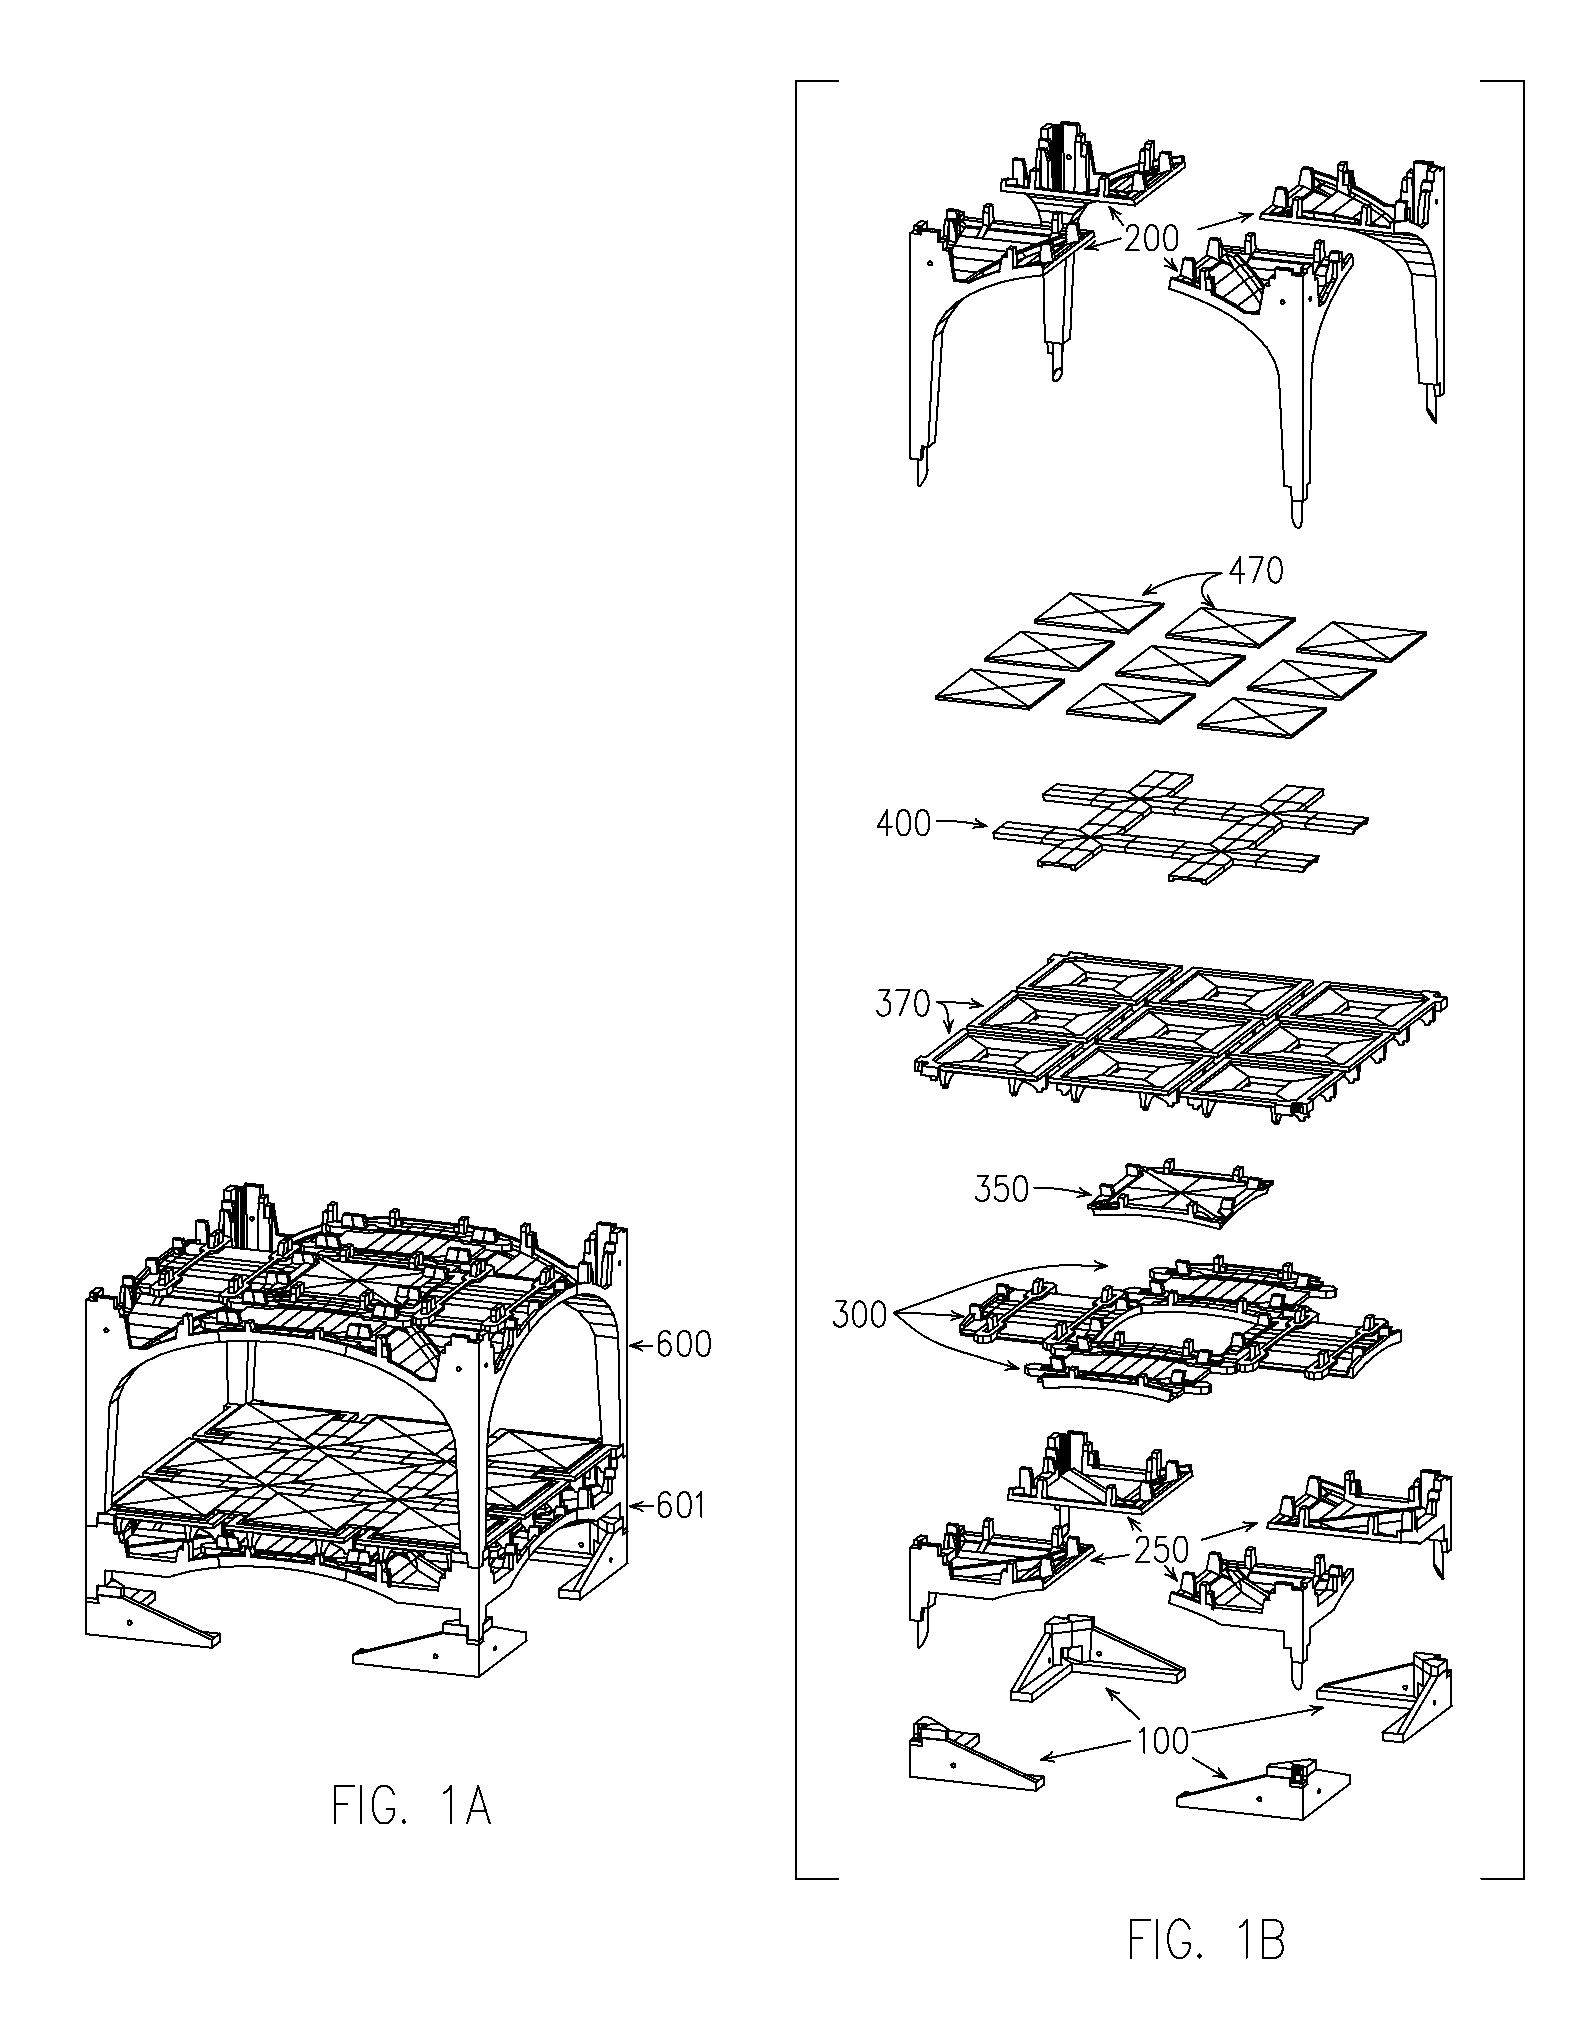 System for construction of a compression structure with corner blocks, key blocks, and corner block supports